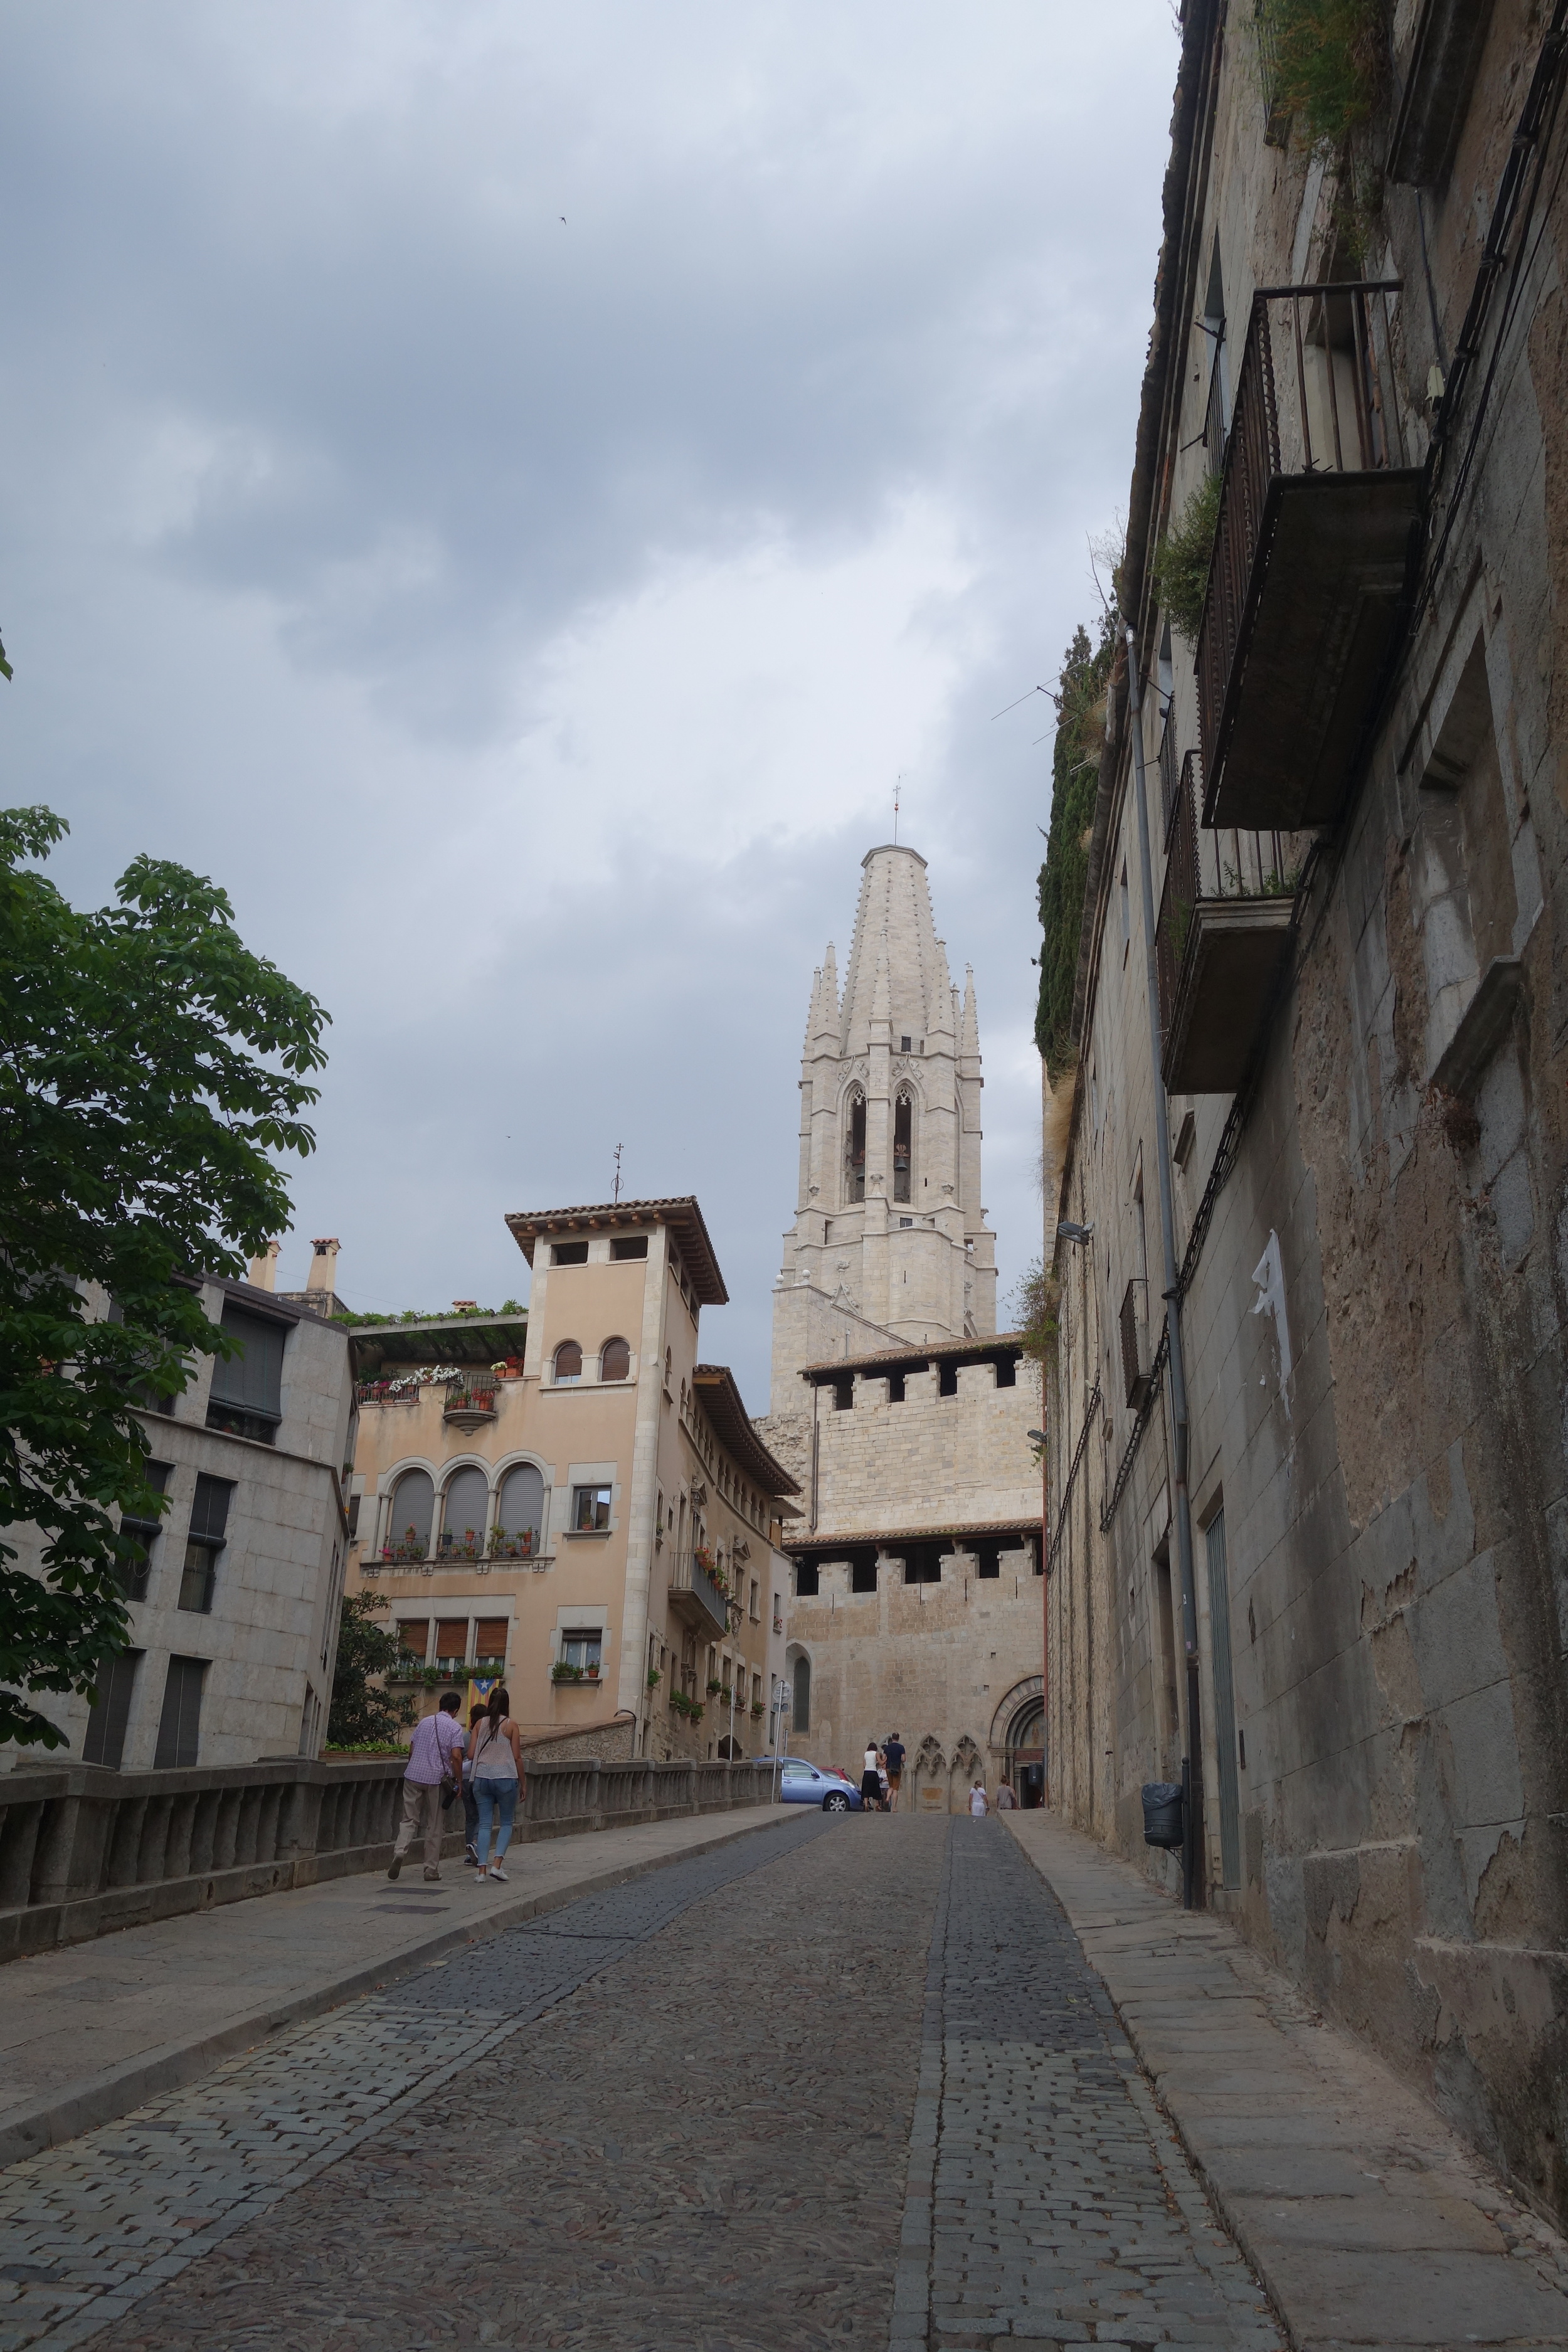  The cathedral in Girona 